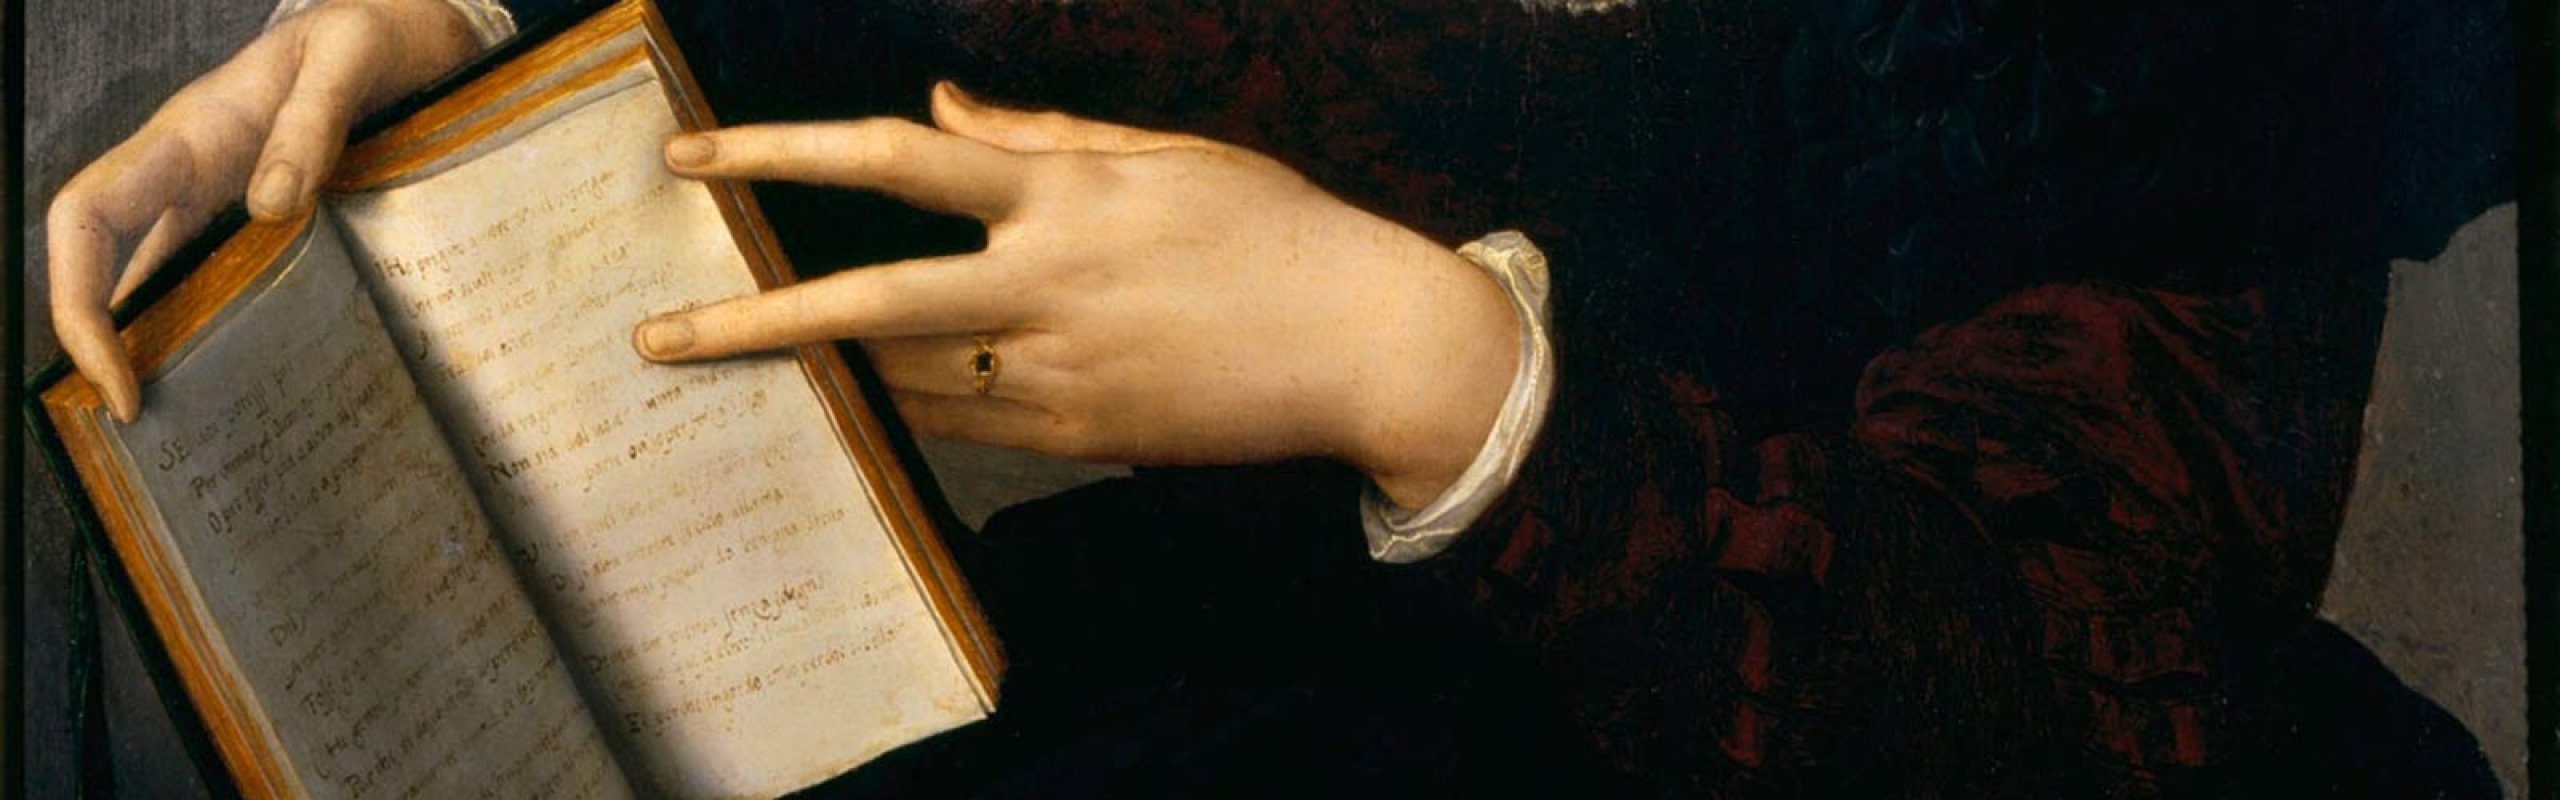 Nature’s secretaries: Renaissance women and the art of writing artless letters